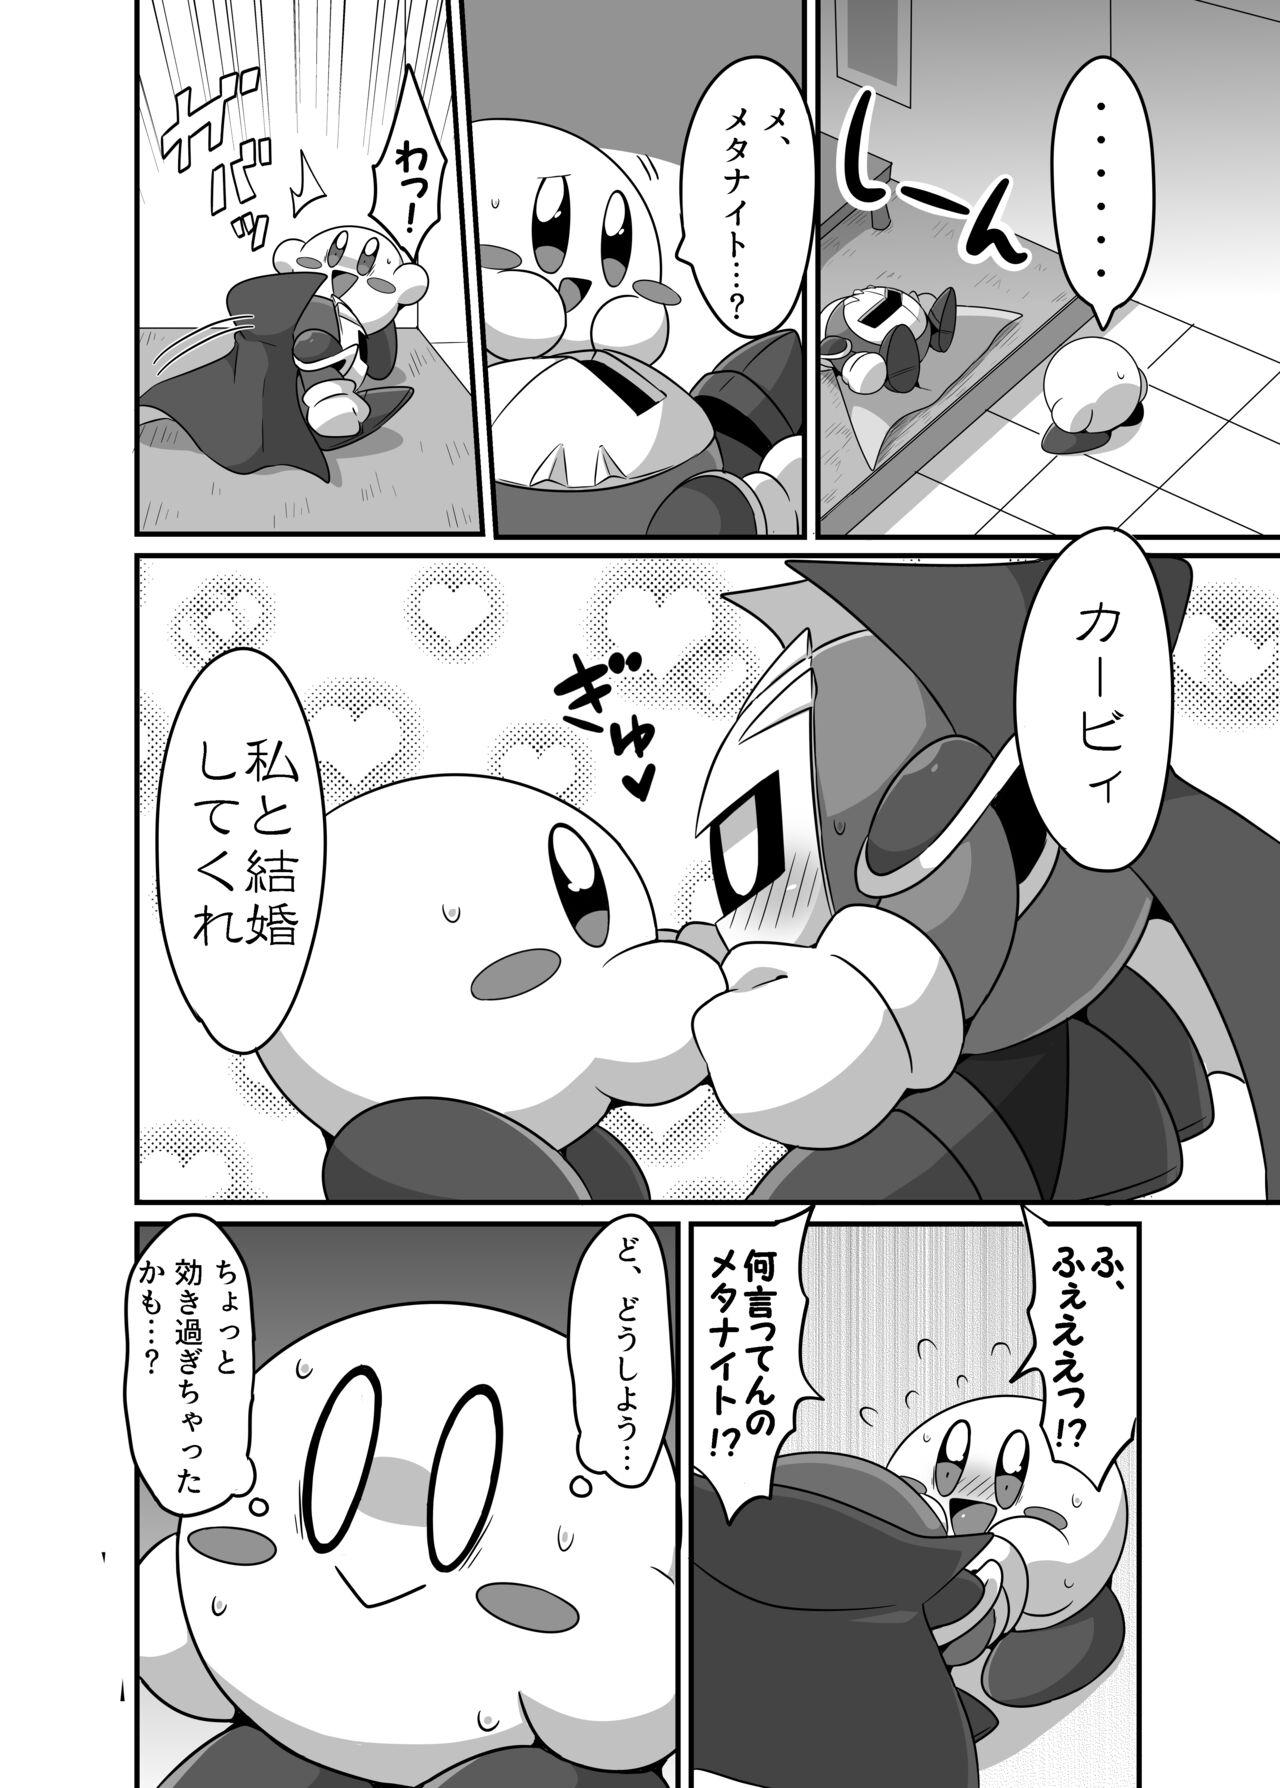 Chupando I Want to Do XXX Even For Spheres! - Kirby Wam - Page 8